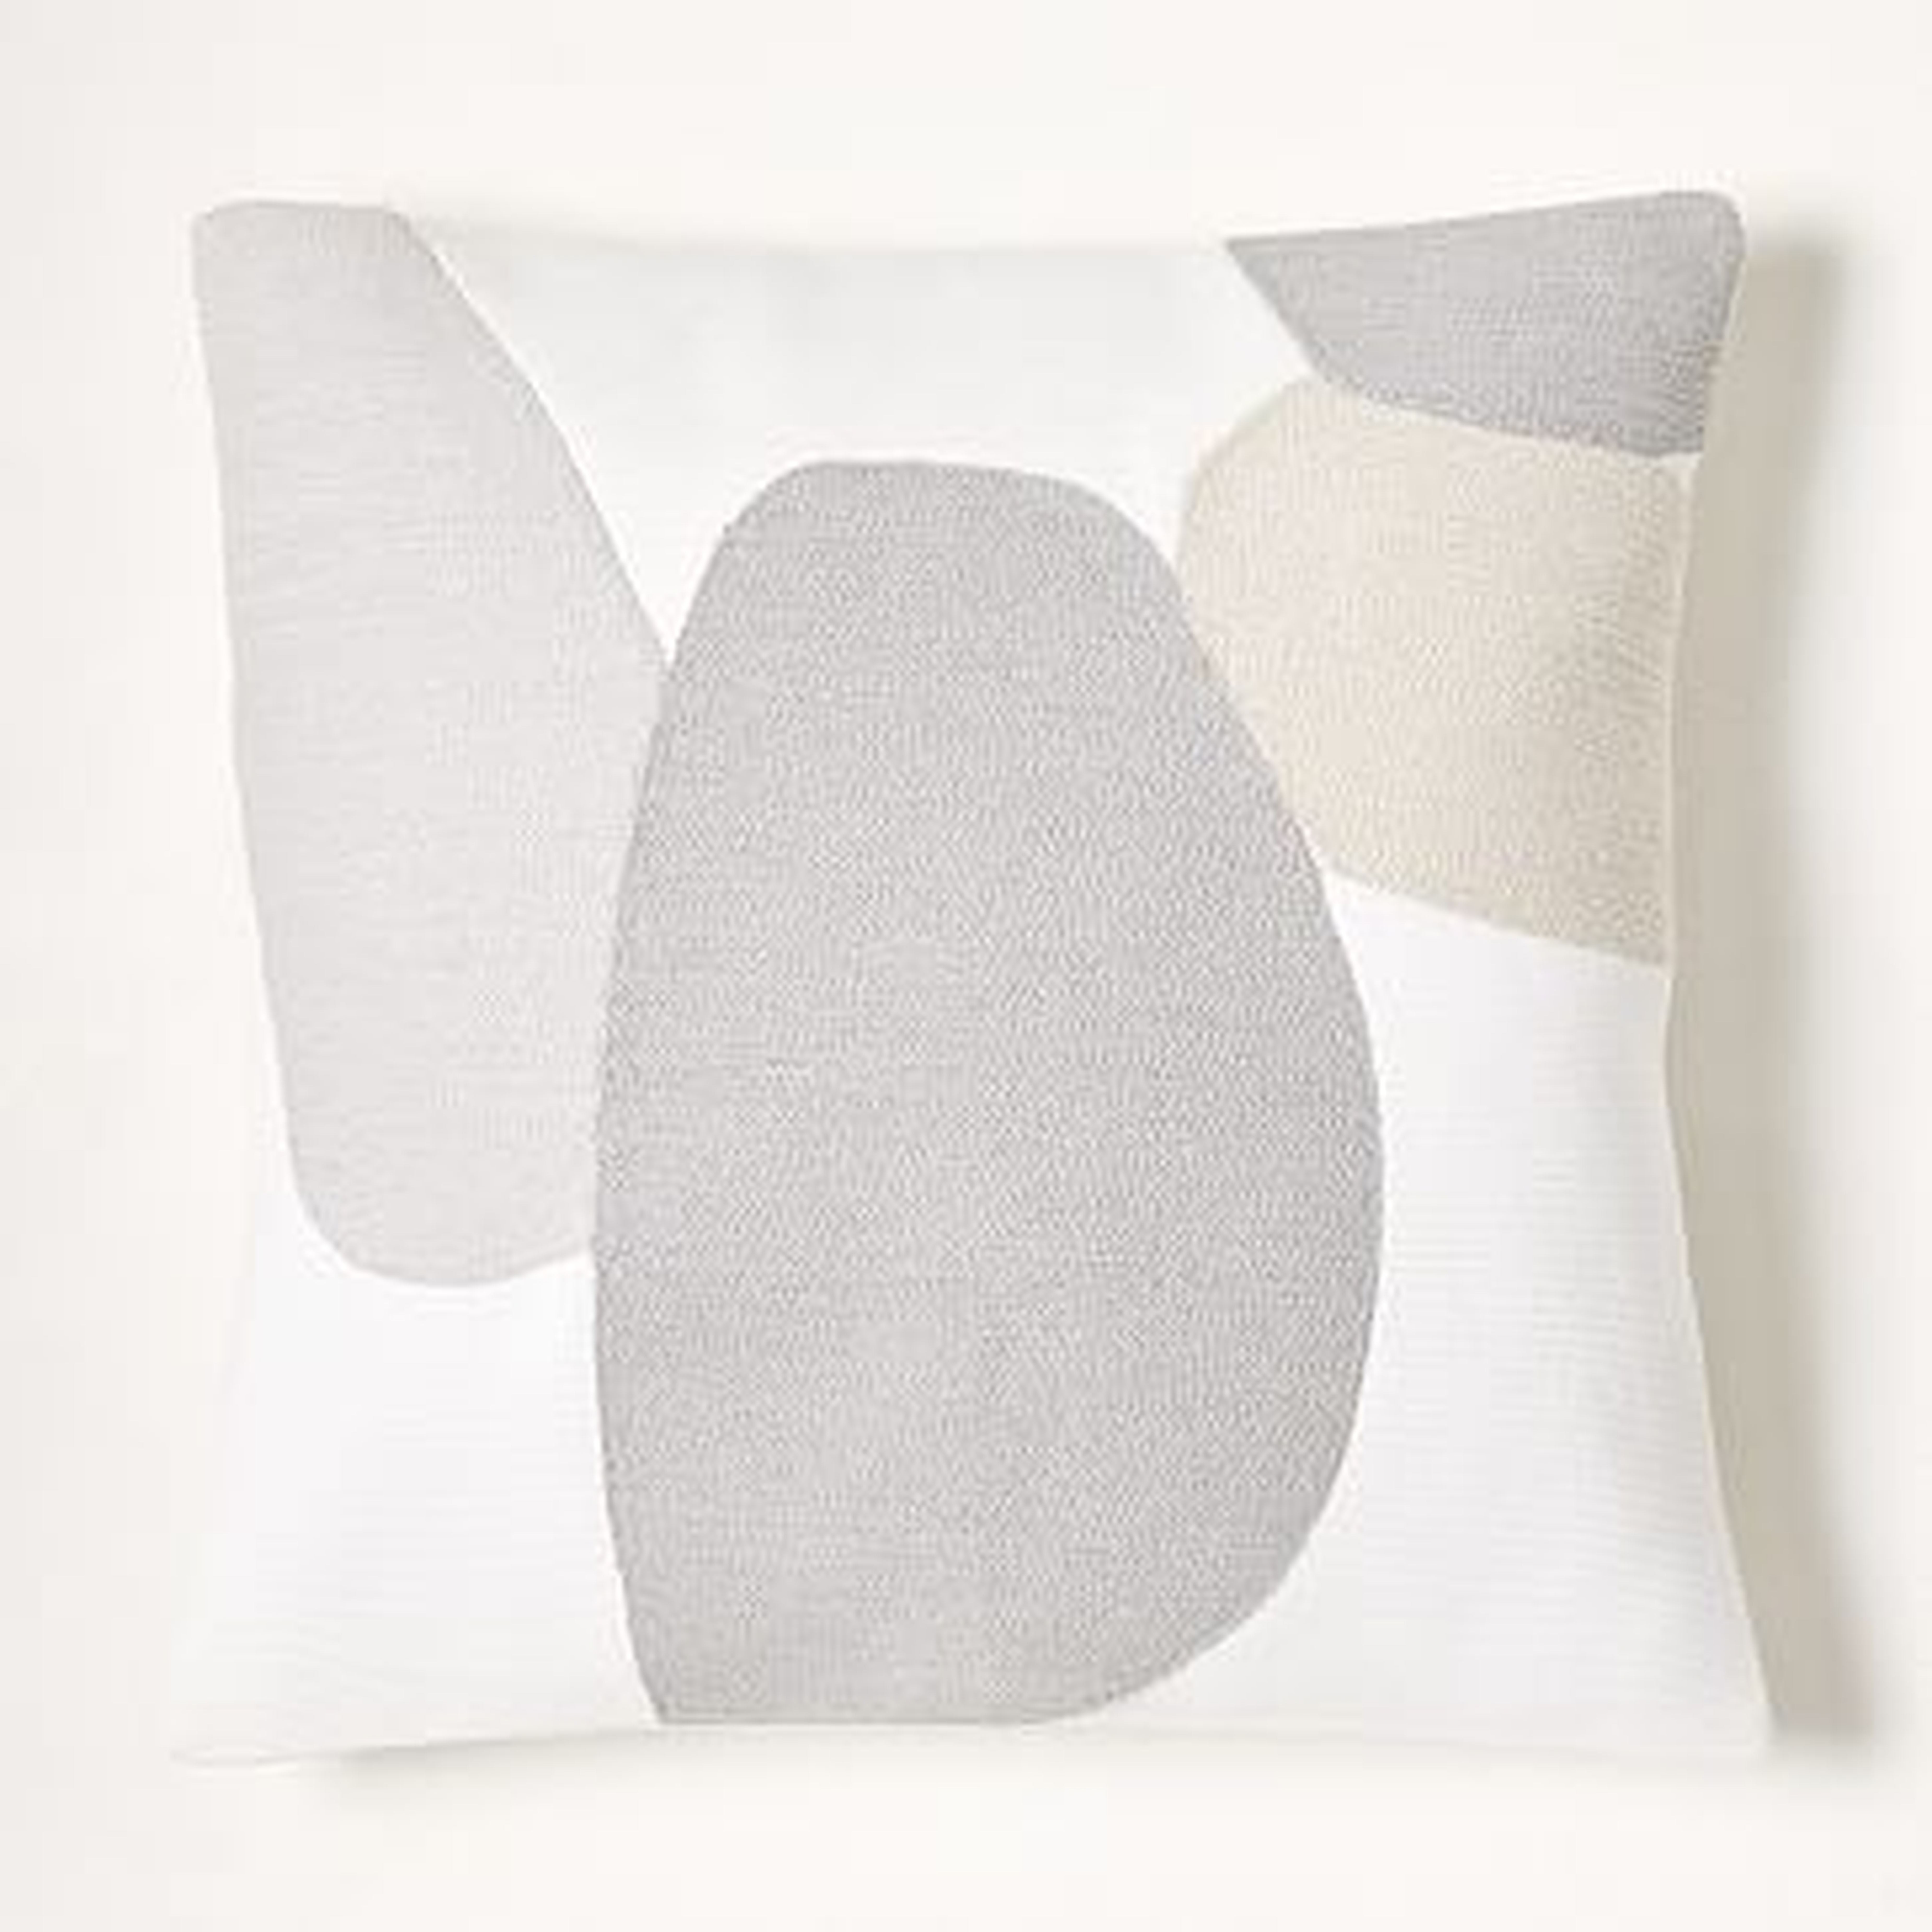 Corded Pebble Pillow Cover, 18"x18", Pearl Gray, Set of 2 - West Elm